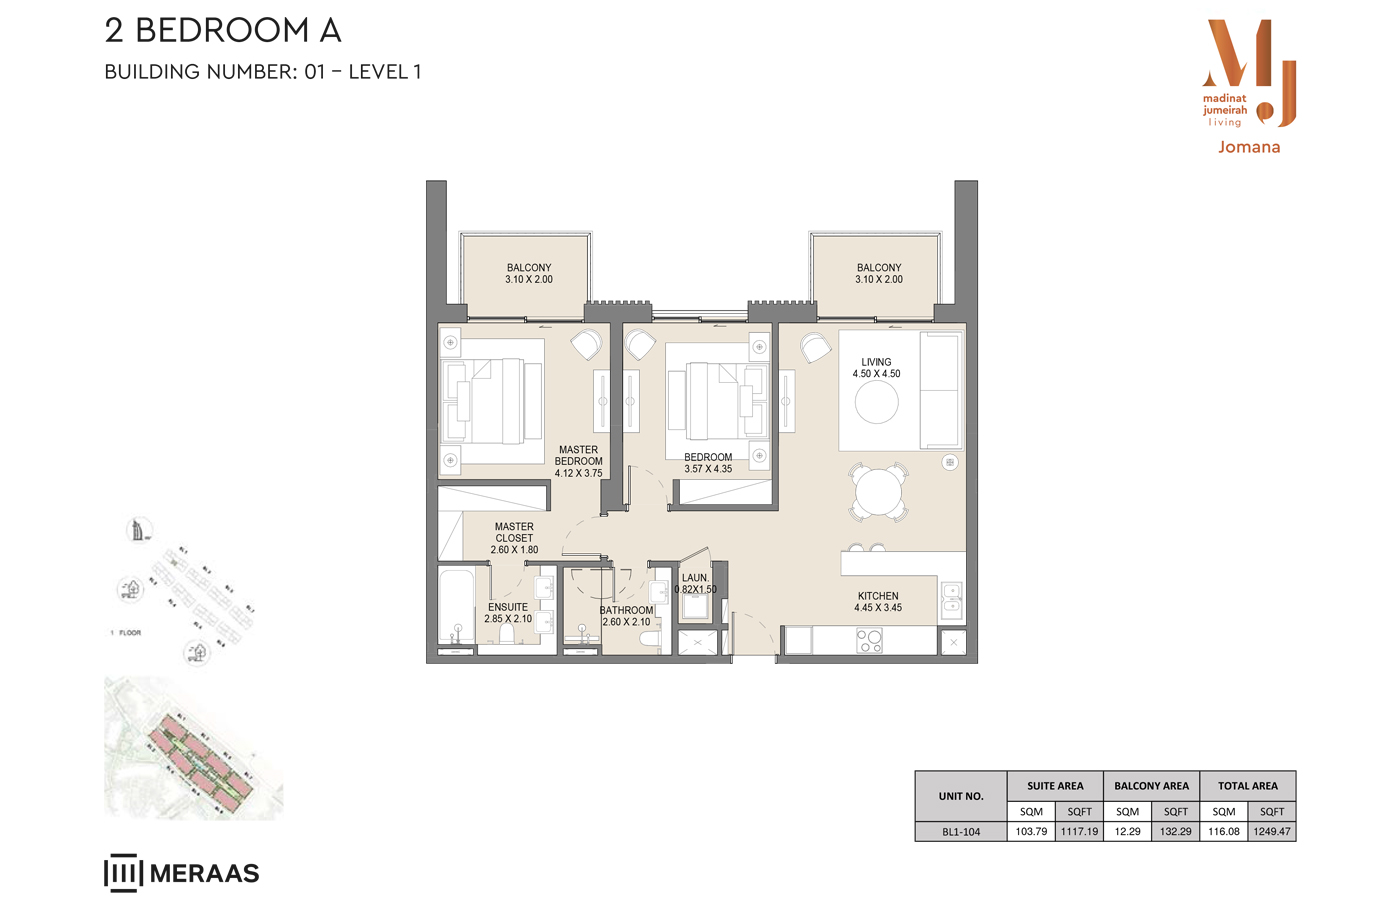 2 Bedroom A, Level 1